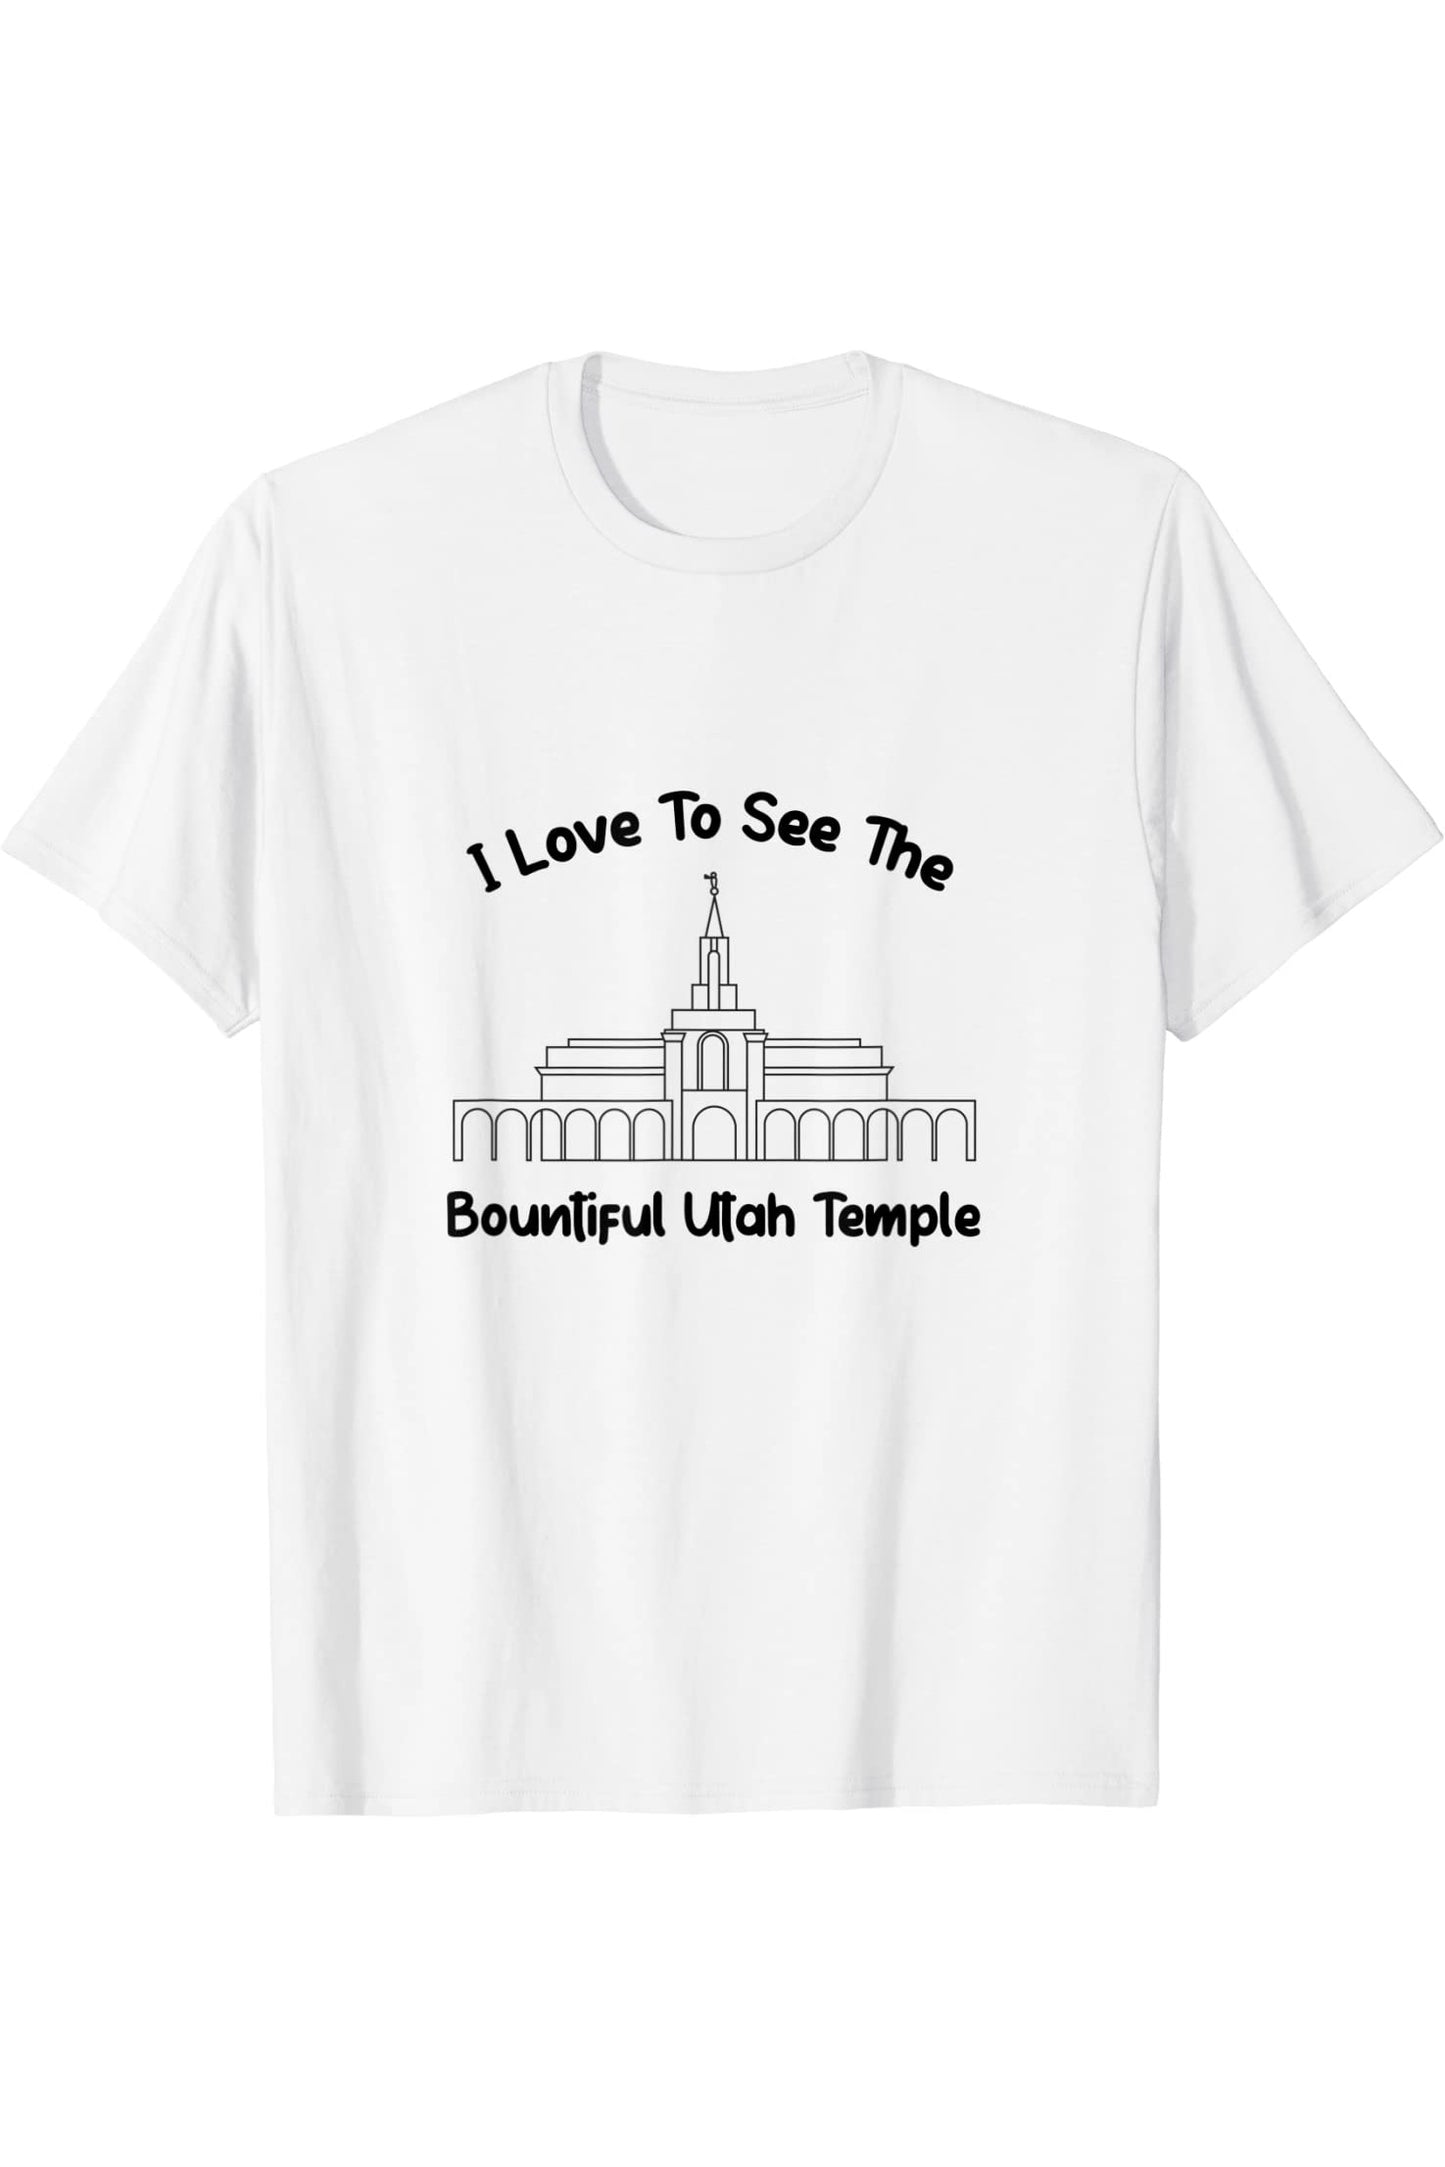 Temple Utah abondant, I love to see my temple, primary T-Shirt